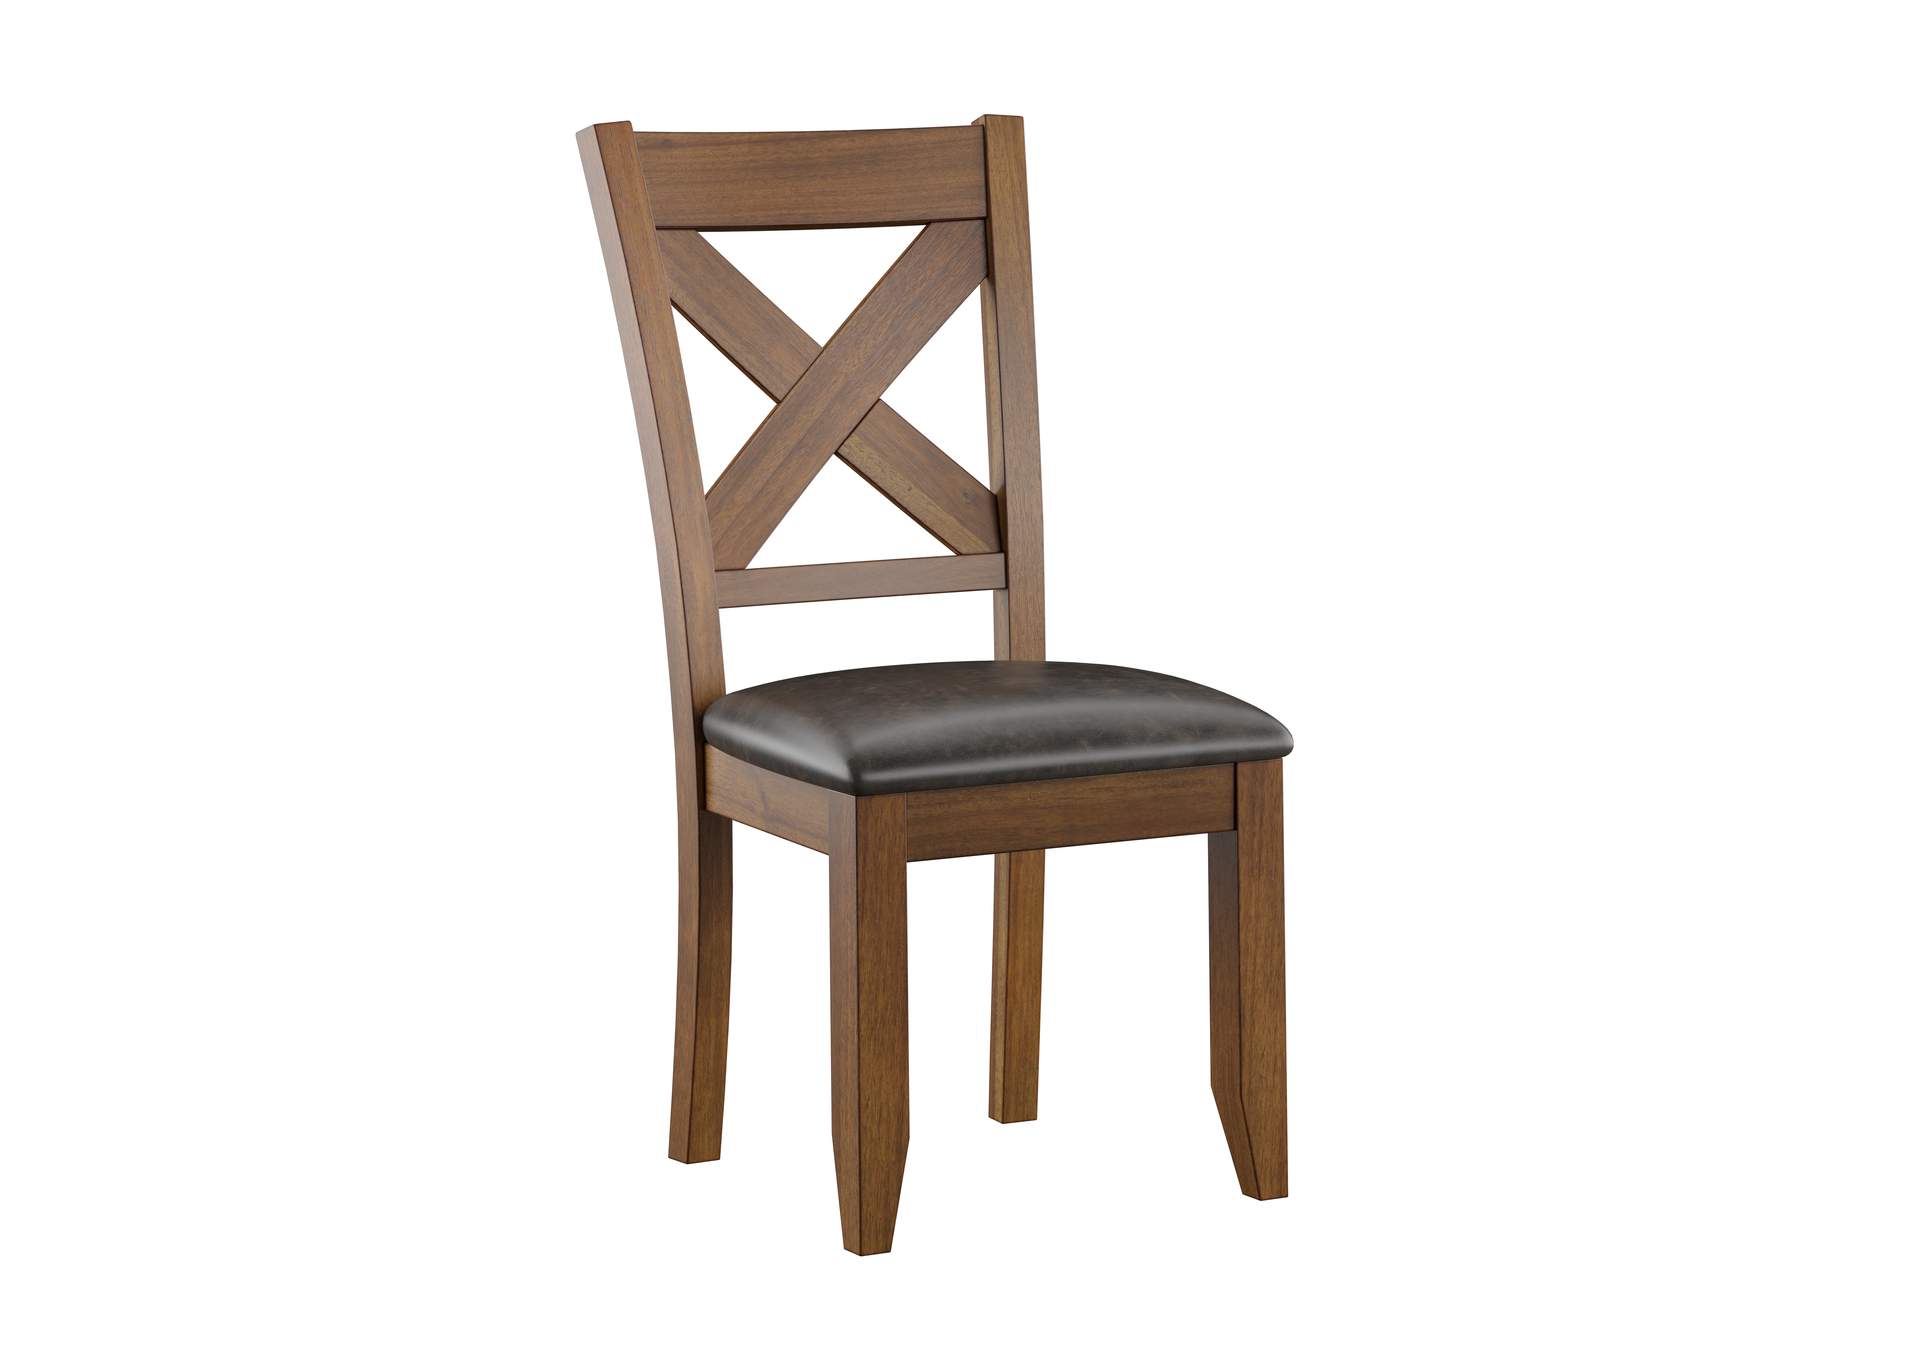 Darby Upholstered Dining Chair,Emerald Home Furnishings